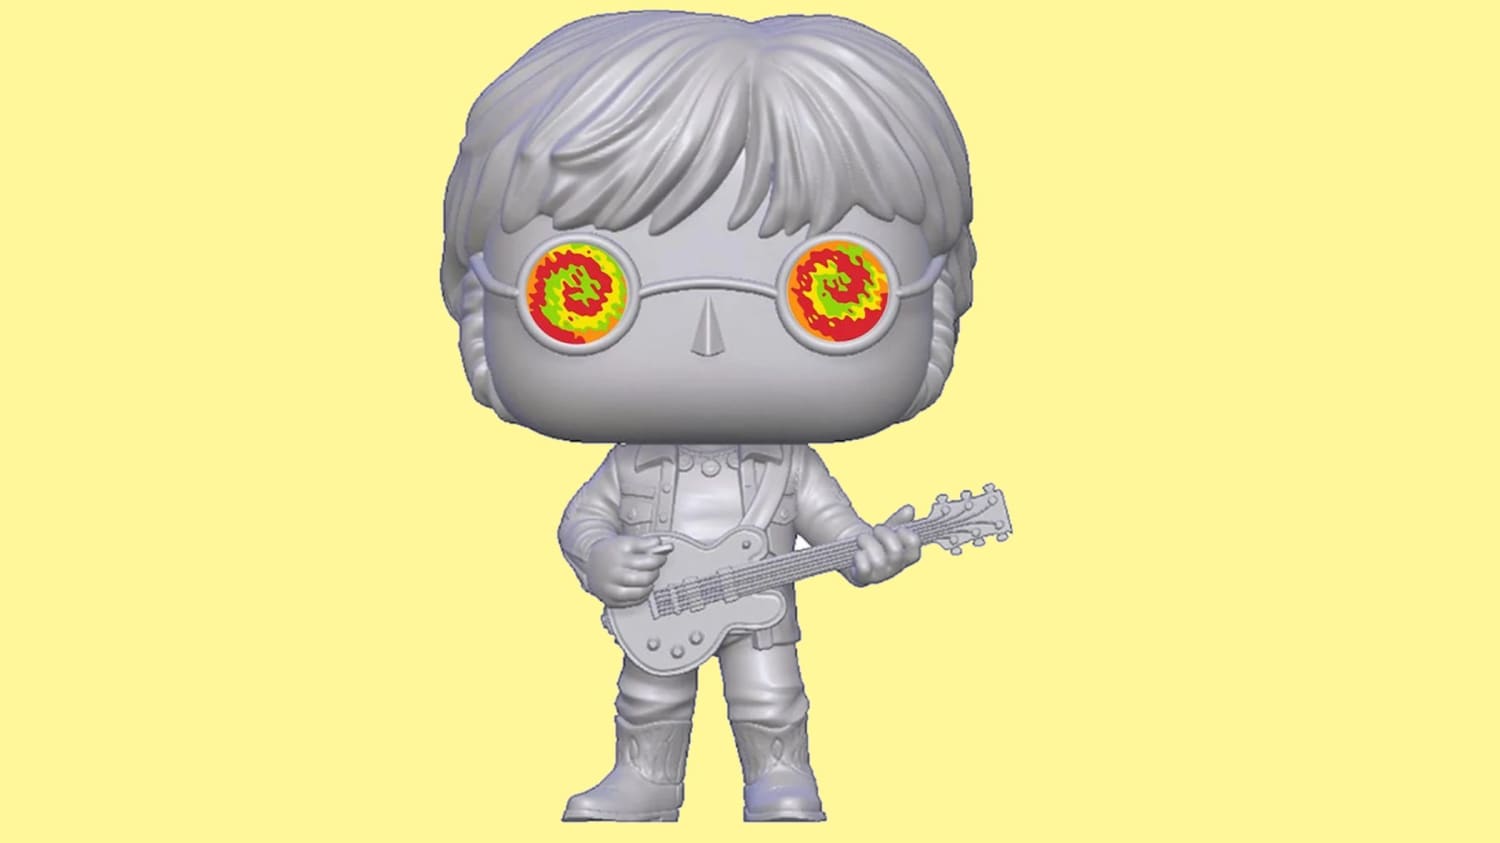 John Lennon Goes Psychedelic With Funko’s New All-White Pop! Variant